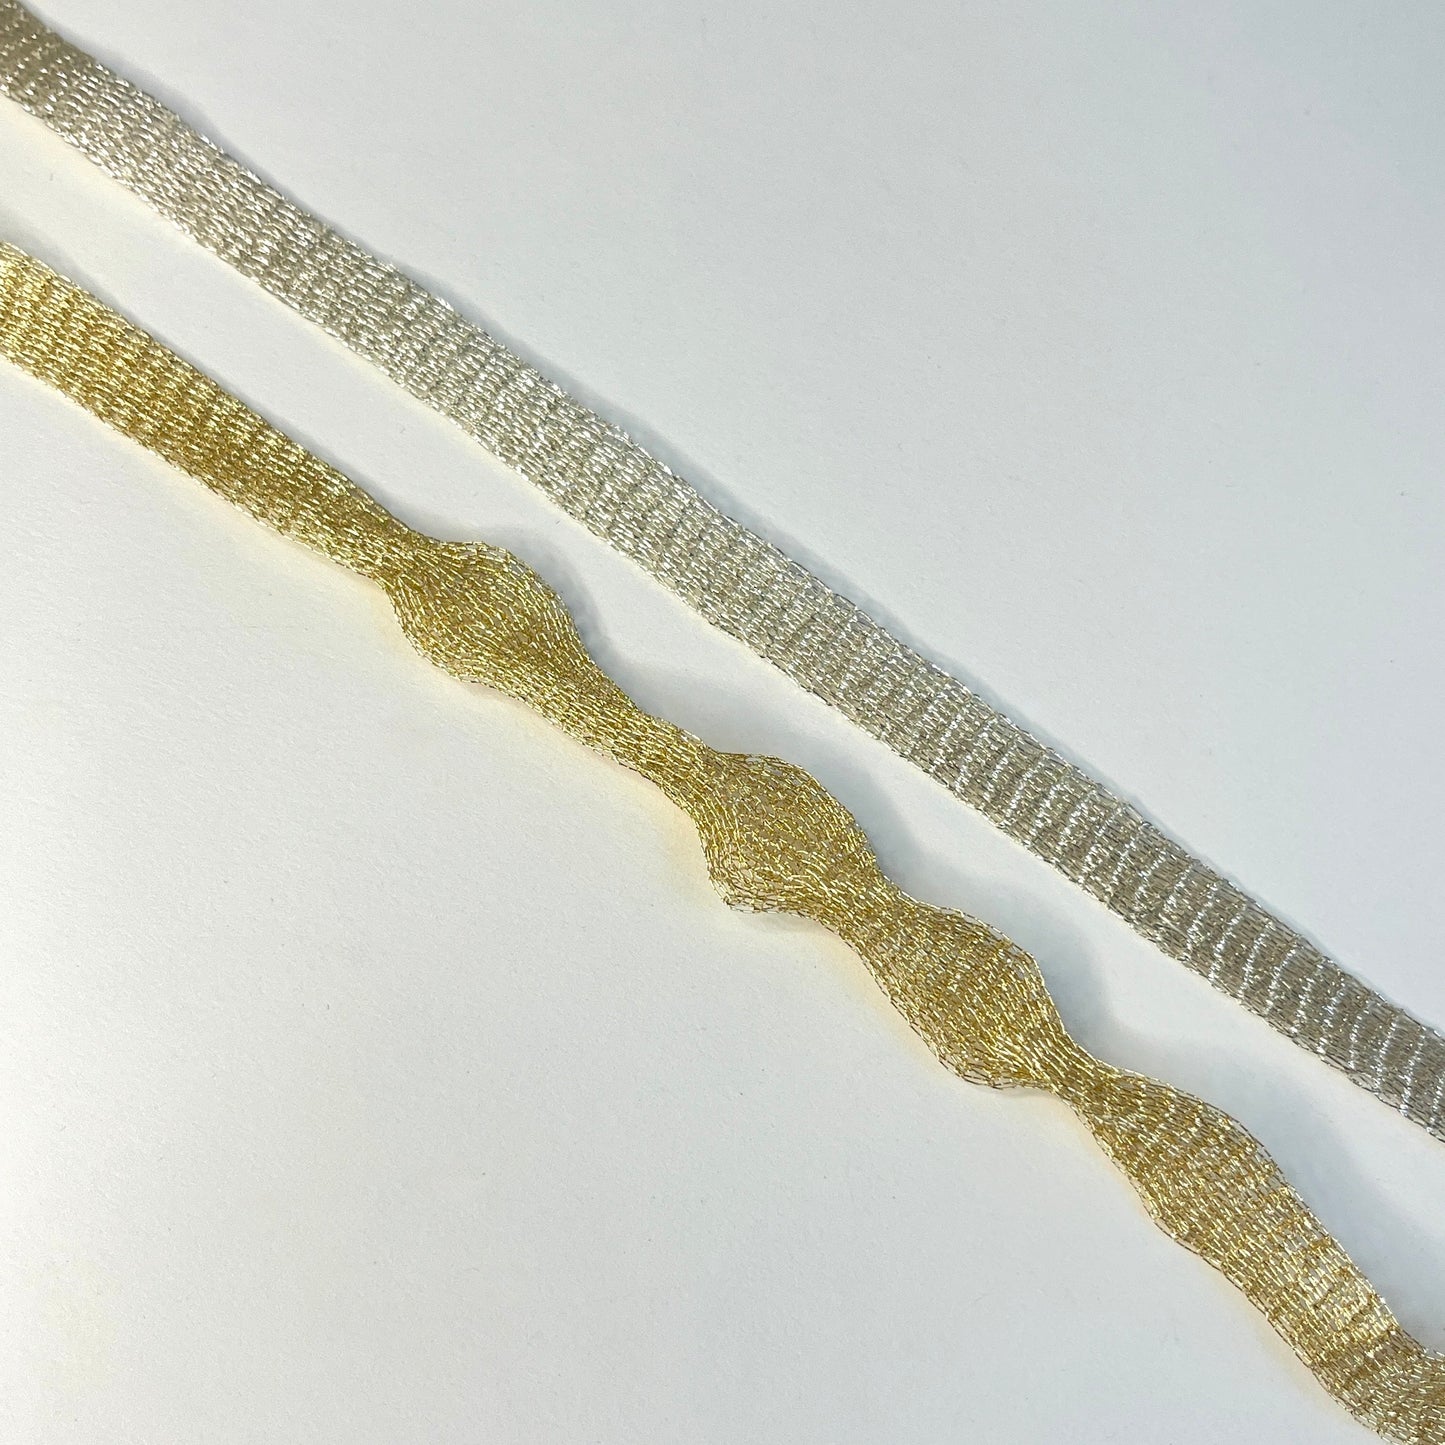 Italian Mesh wire ribbon trimming by Menoni  Knitted metallic tubular mesh trim that could be used for straps or used for jewellery creations. The trim can easily be pulled from either side to create unique shaped contortions for floral arranging, jewellery making and beading.